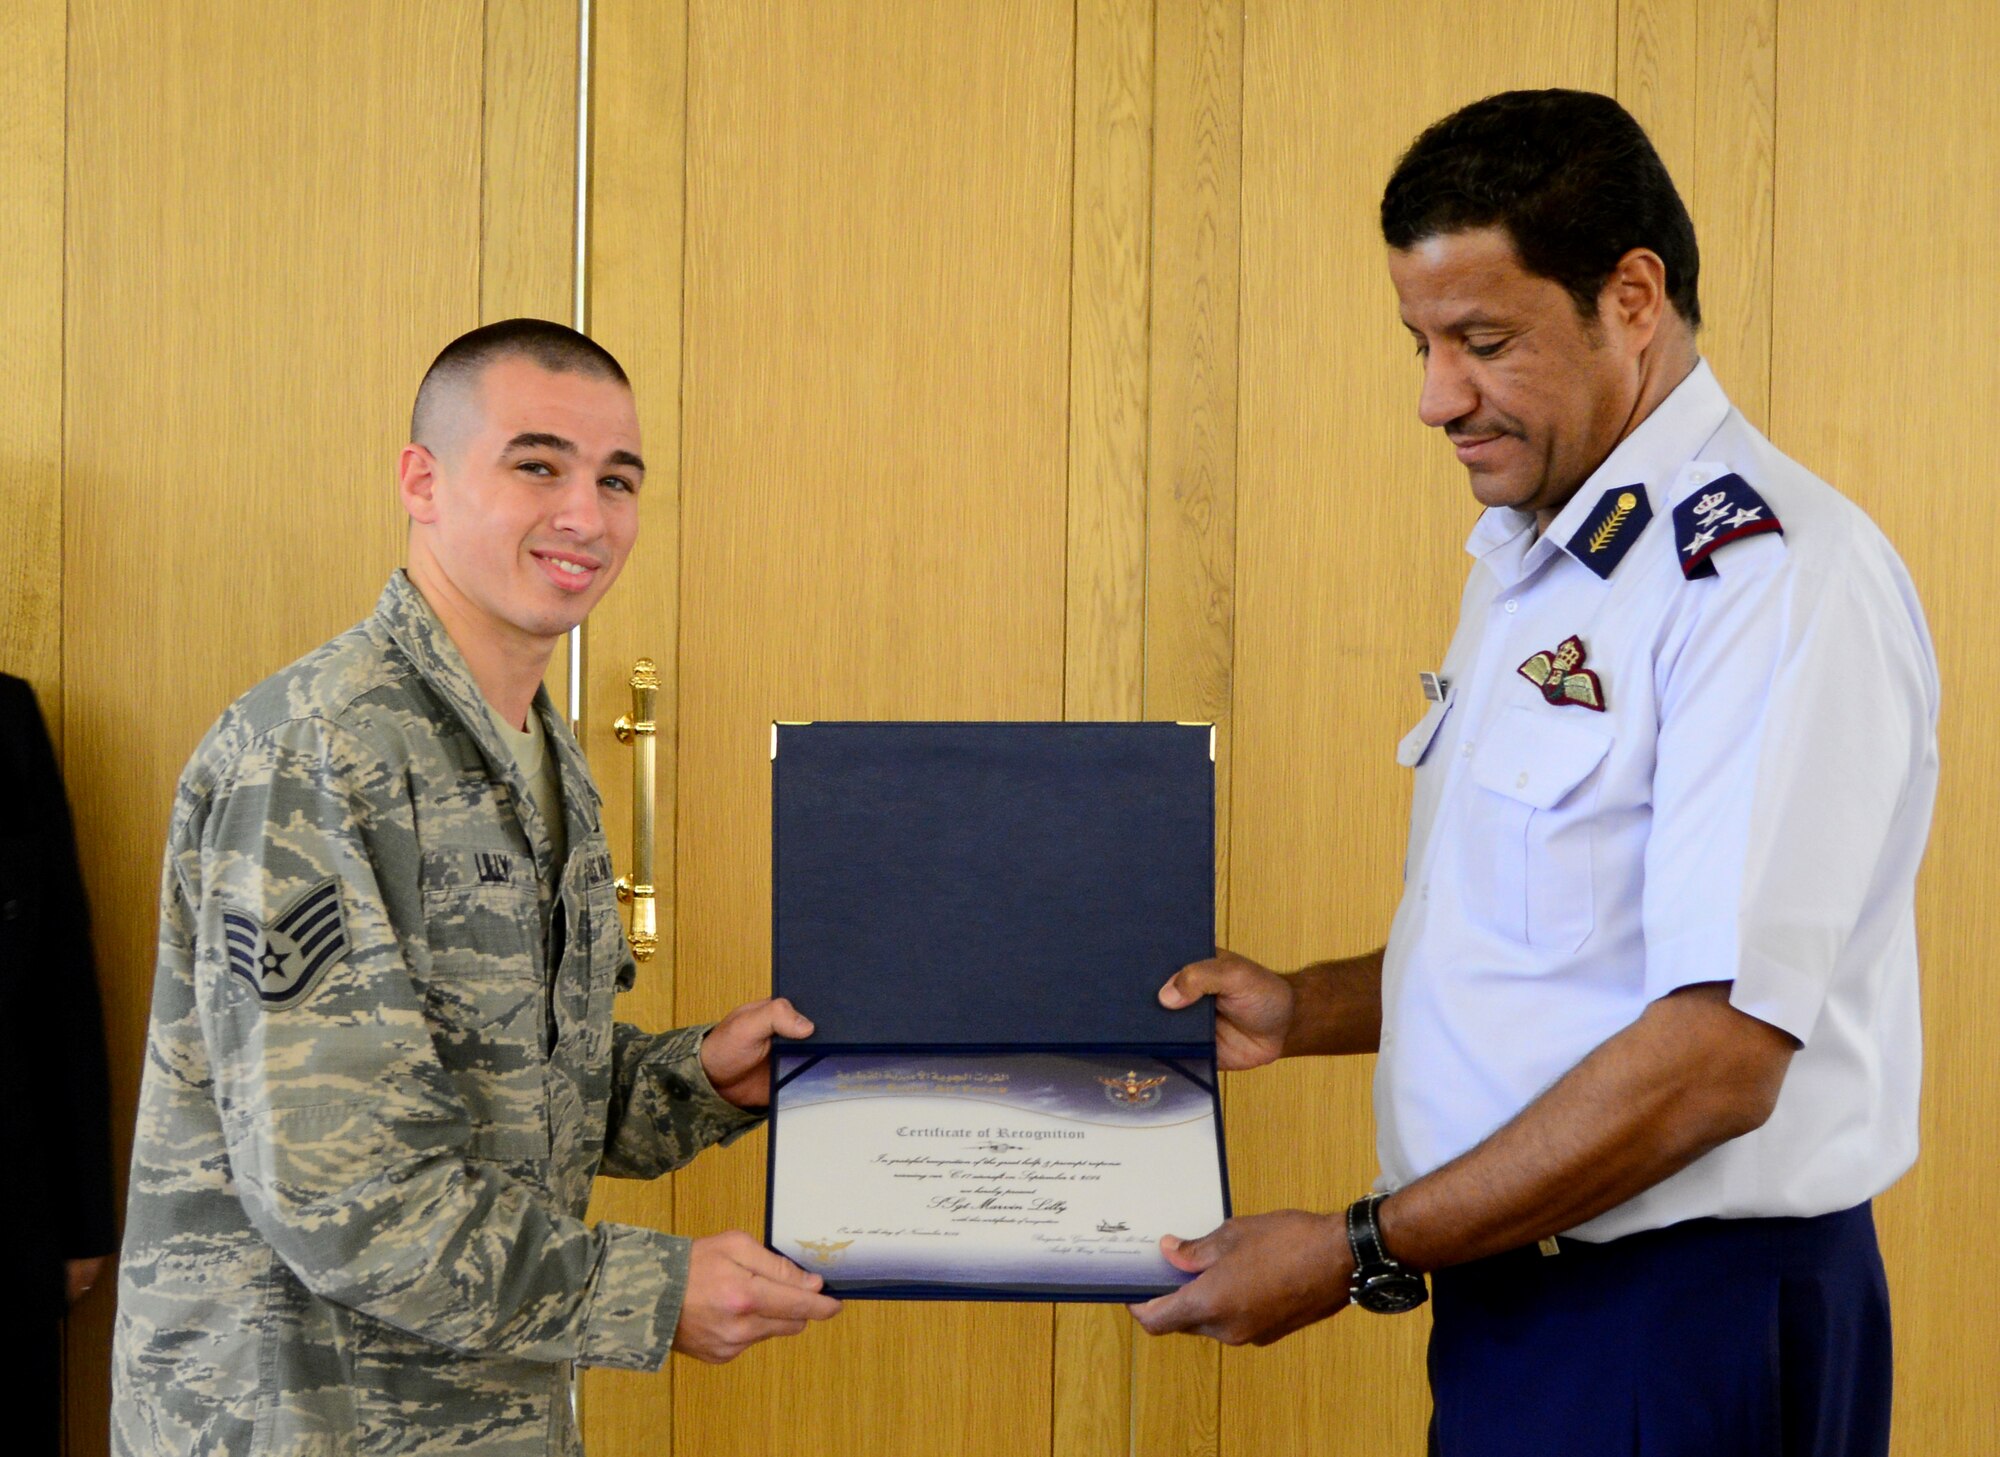 Brig. Gen. 'Ali Bayyat Al-'Asiri, Al Udeid Air Base commander/OC Transportation Wing, presents U.S. Air Force Staff Sgt. Marvin Lilly, 379th Expeditionary Civil Engineer Squadron firefighter, with a certificate during the Qatar Emiri Air Force’s Air Lift Wing’s C-17 Globemaster III 5th year anniversary ceremony Nov. 7, 2014, at Al Udeid Air Base, Qatar. The firefighters were presented with certificates for their help in putting out a C-17 fire Sept. 6, here. Crash fire crews responded out to the C-17 to extinguish the fire limiting the damage to the aircraft.  (U.S. Air Force photo by Senior Airman Kia Atkins)